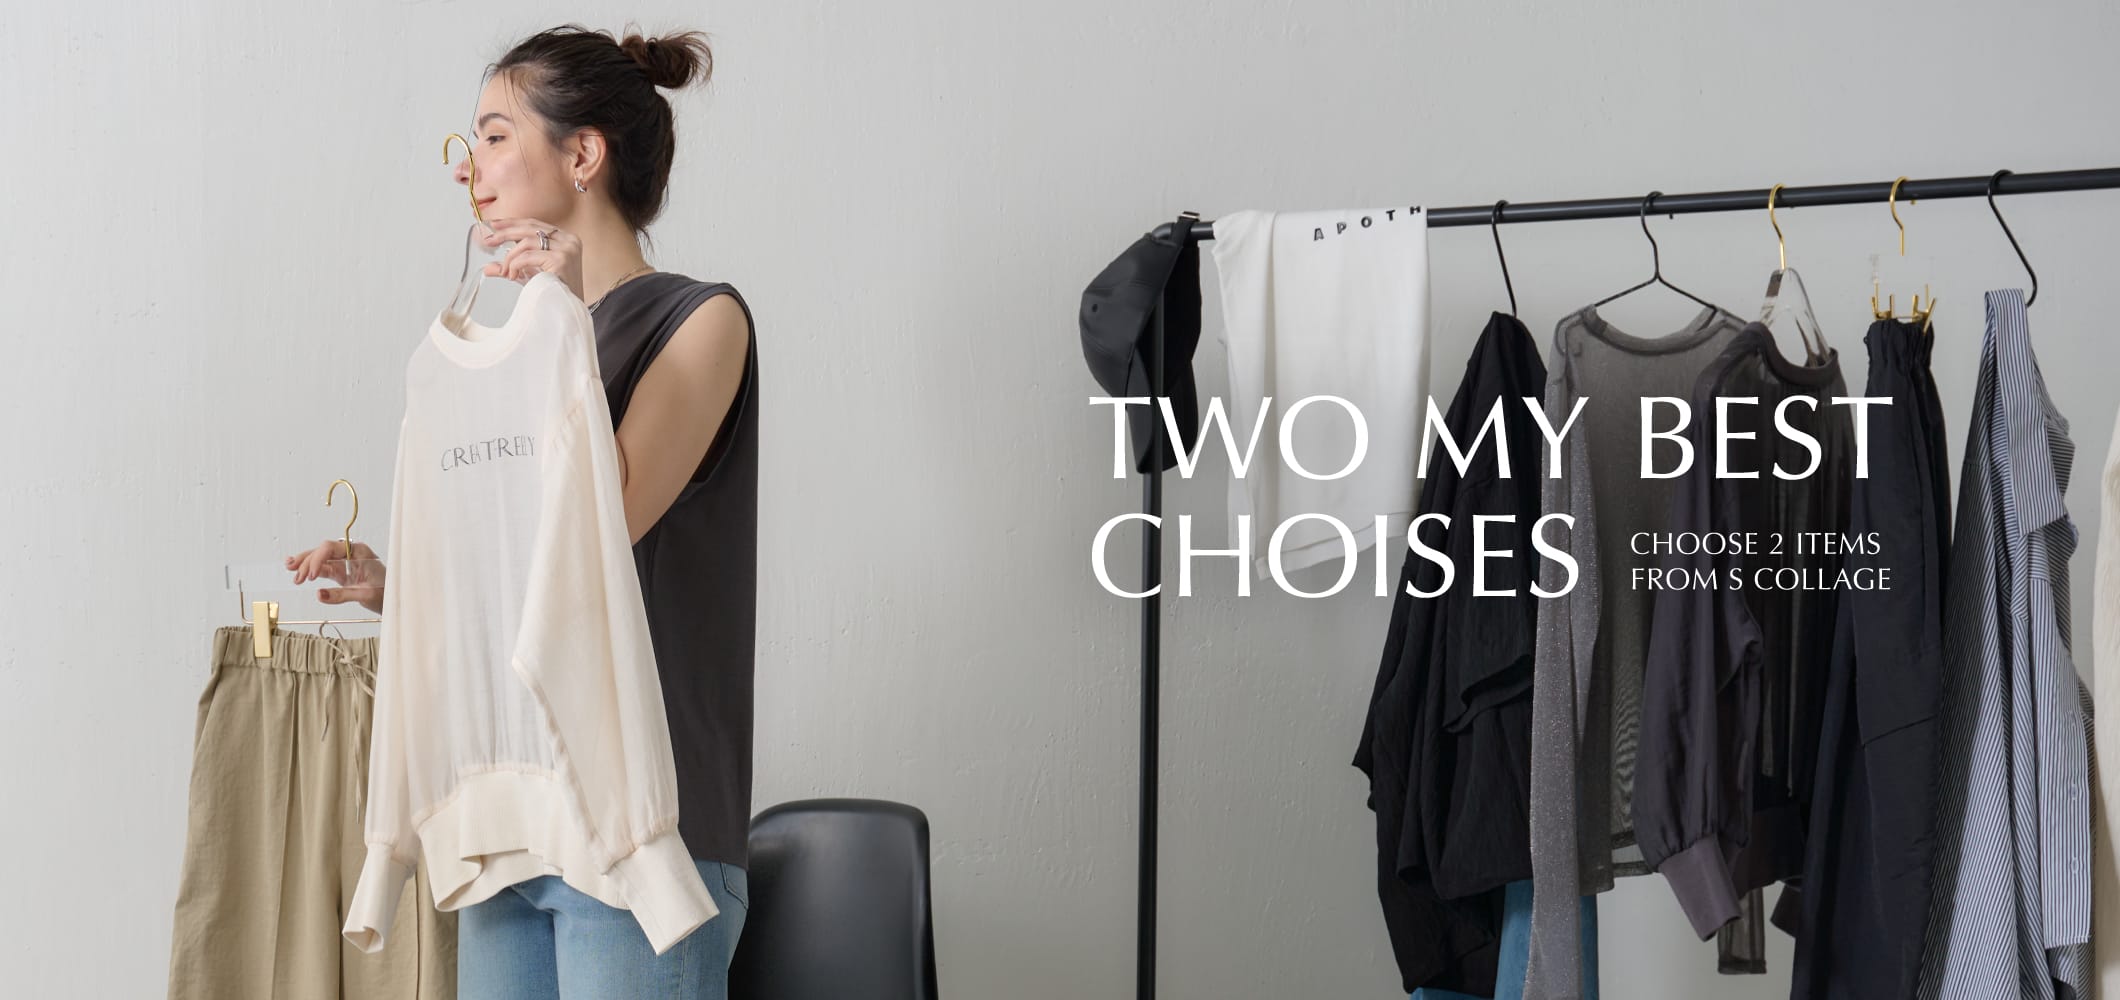 TWO MY BEST CHOICES　-春のセットフェア-